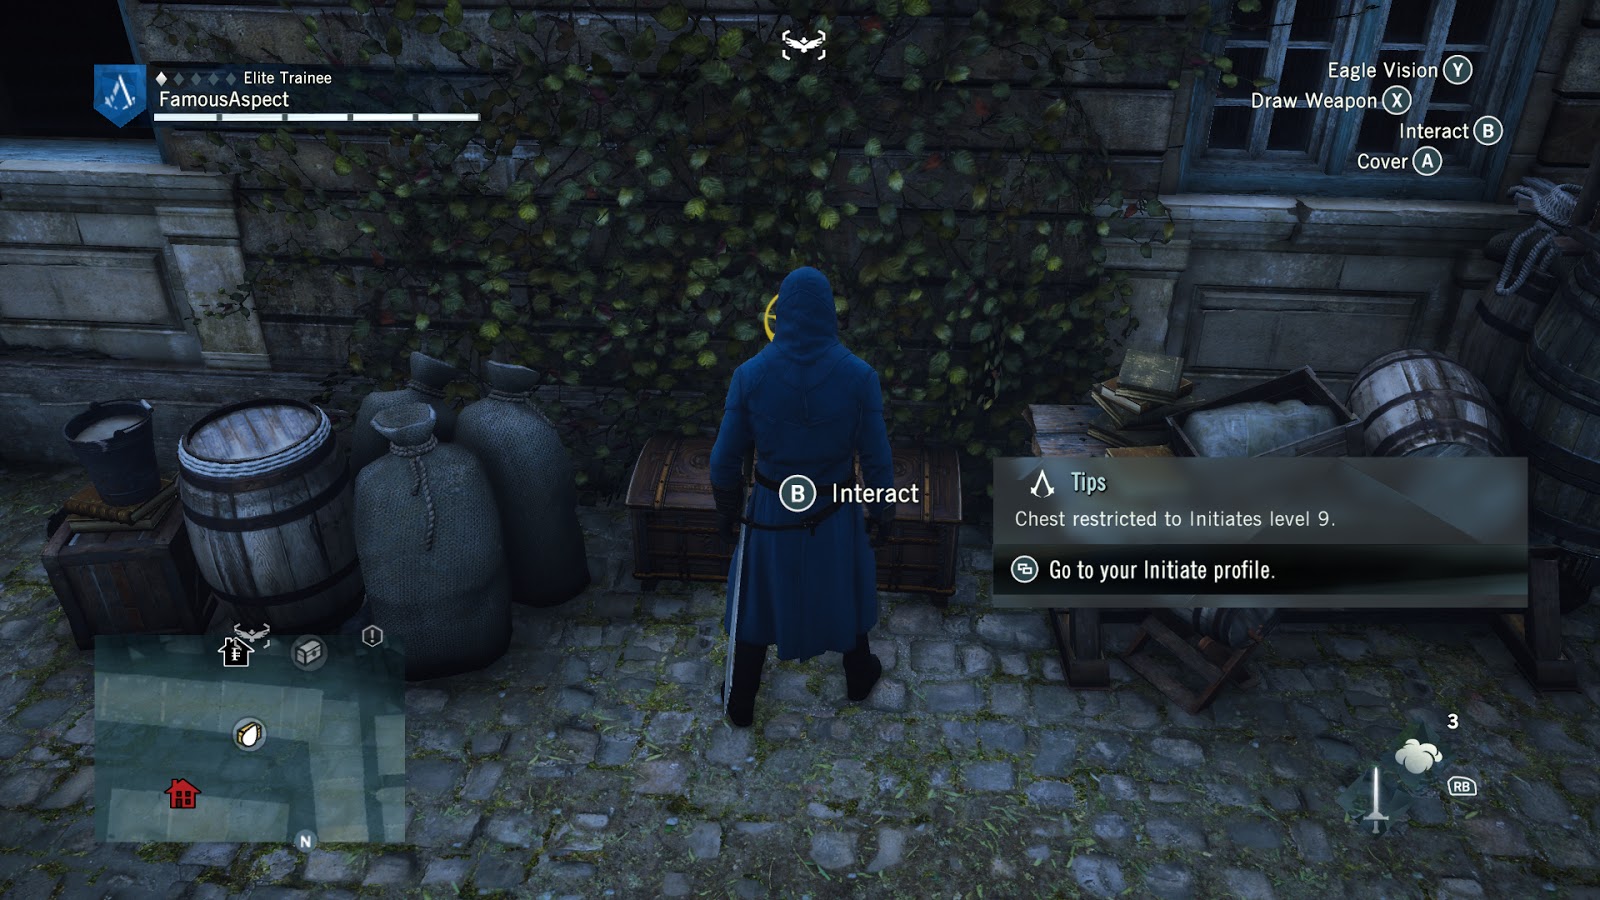 I Spent $100 In Assassin’s Creed Unity So You Wouldn’t Have To